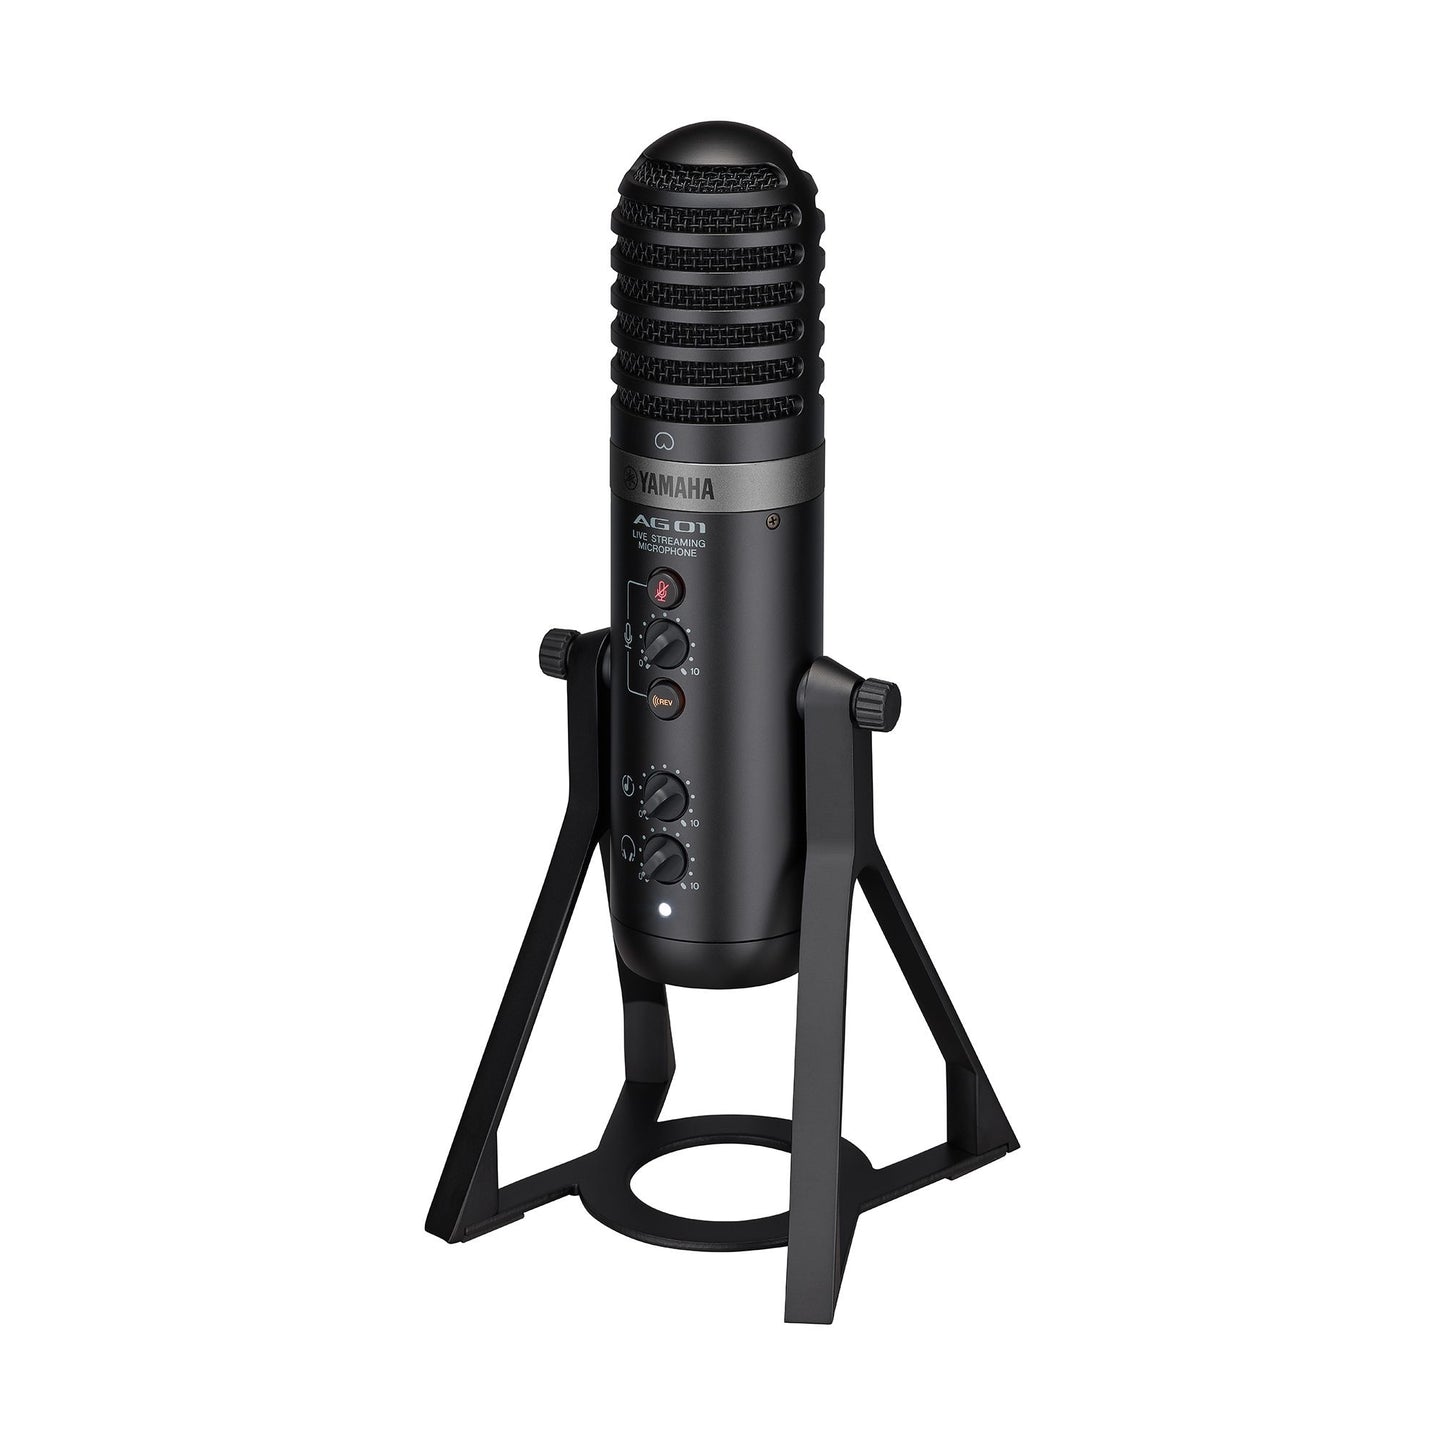 Yamaha AG01 Desktop USB Cardioid Condenser Microphone with Type-C and 3.5mm TRRS AUX I/O, Internal Audio Loopback Function and Built-In Mixer for PC Computer Laptop and Mobile